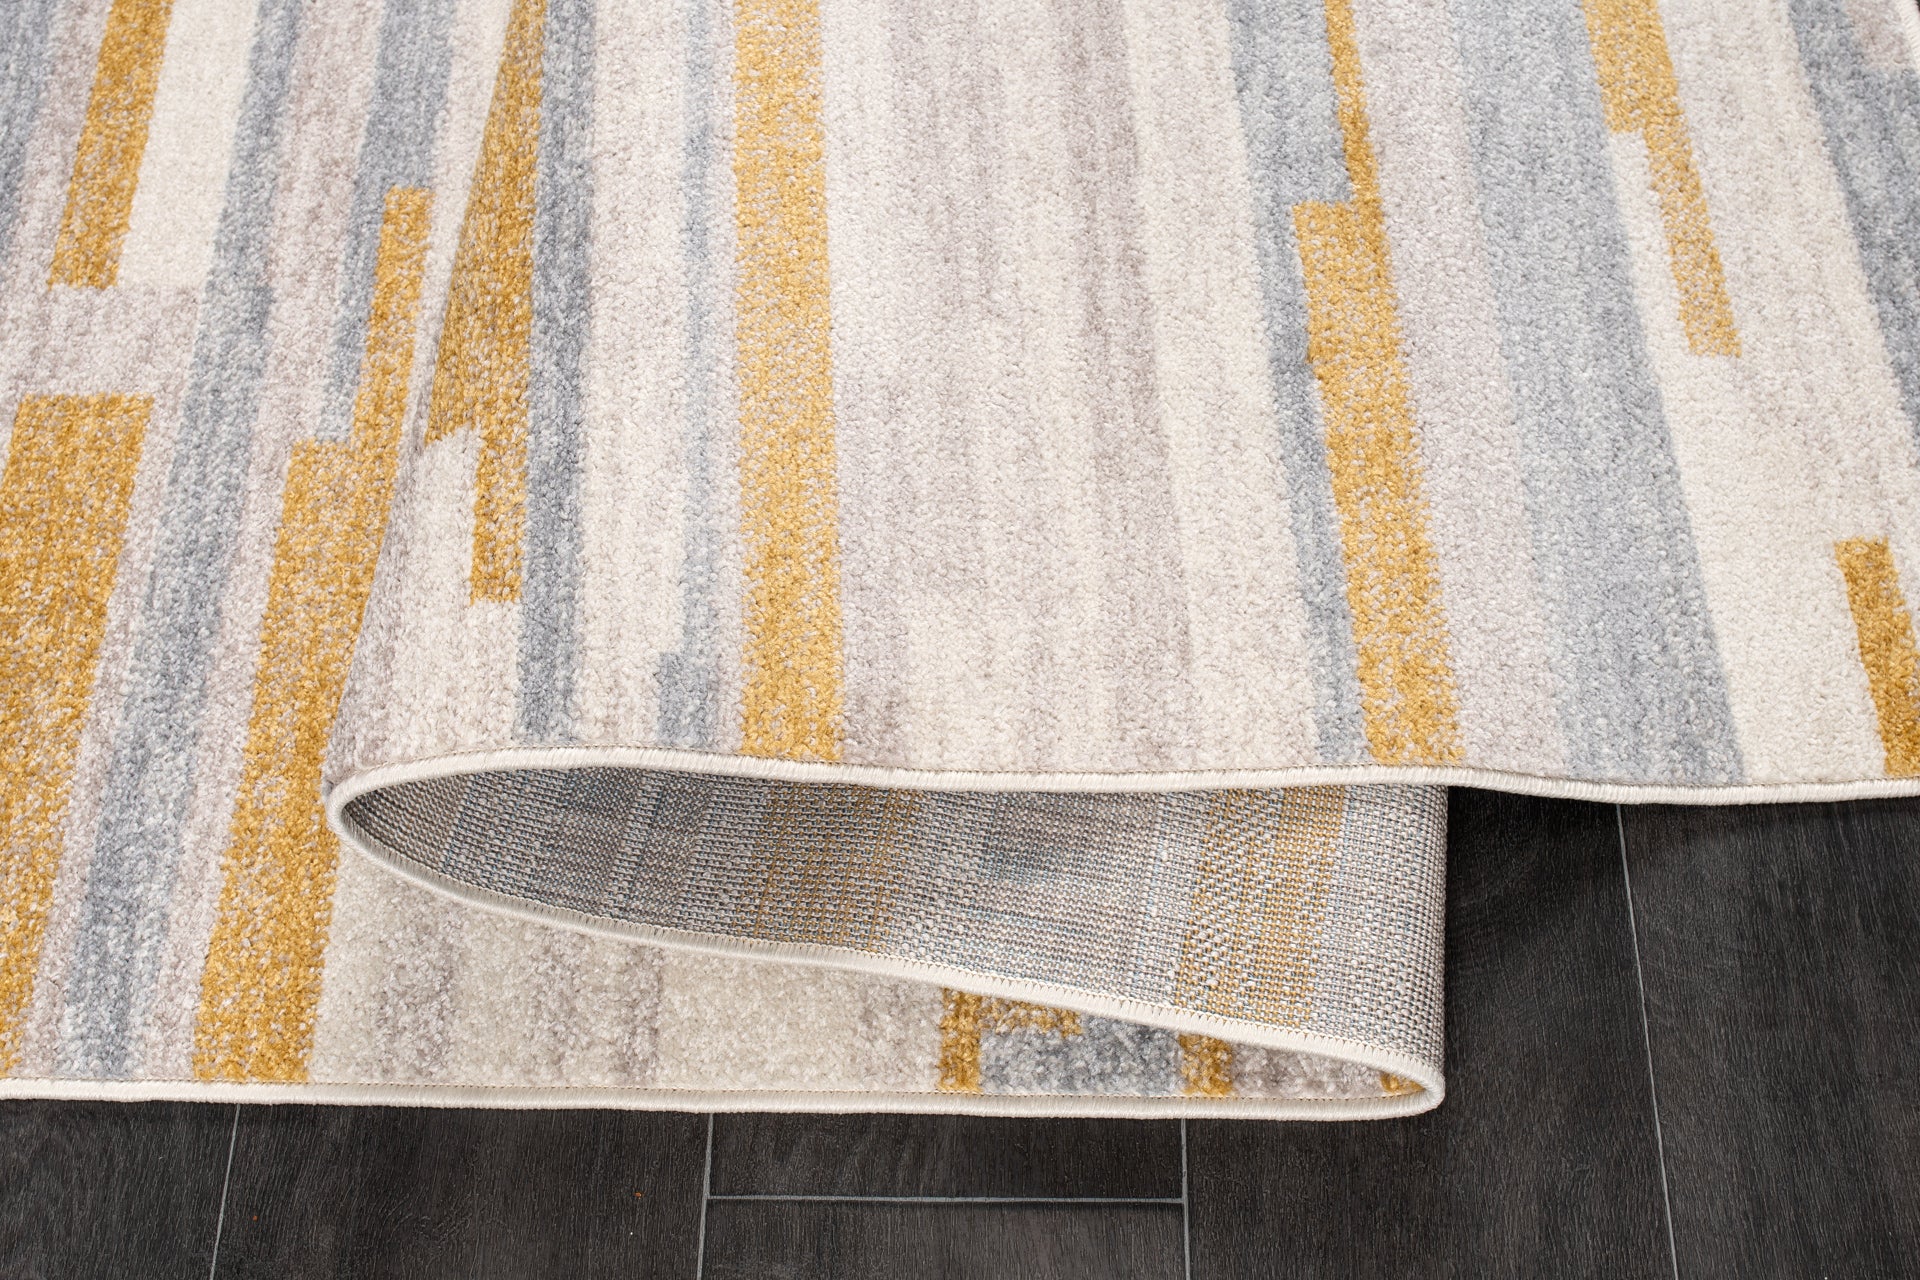 orange grey beige striped abstract rustic minimalist modern contemporary living room area rug 4x6, 4x5 ft Small Carpet, Home Office, Living Room, Bedroom